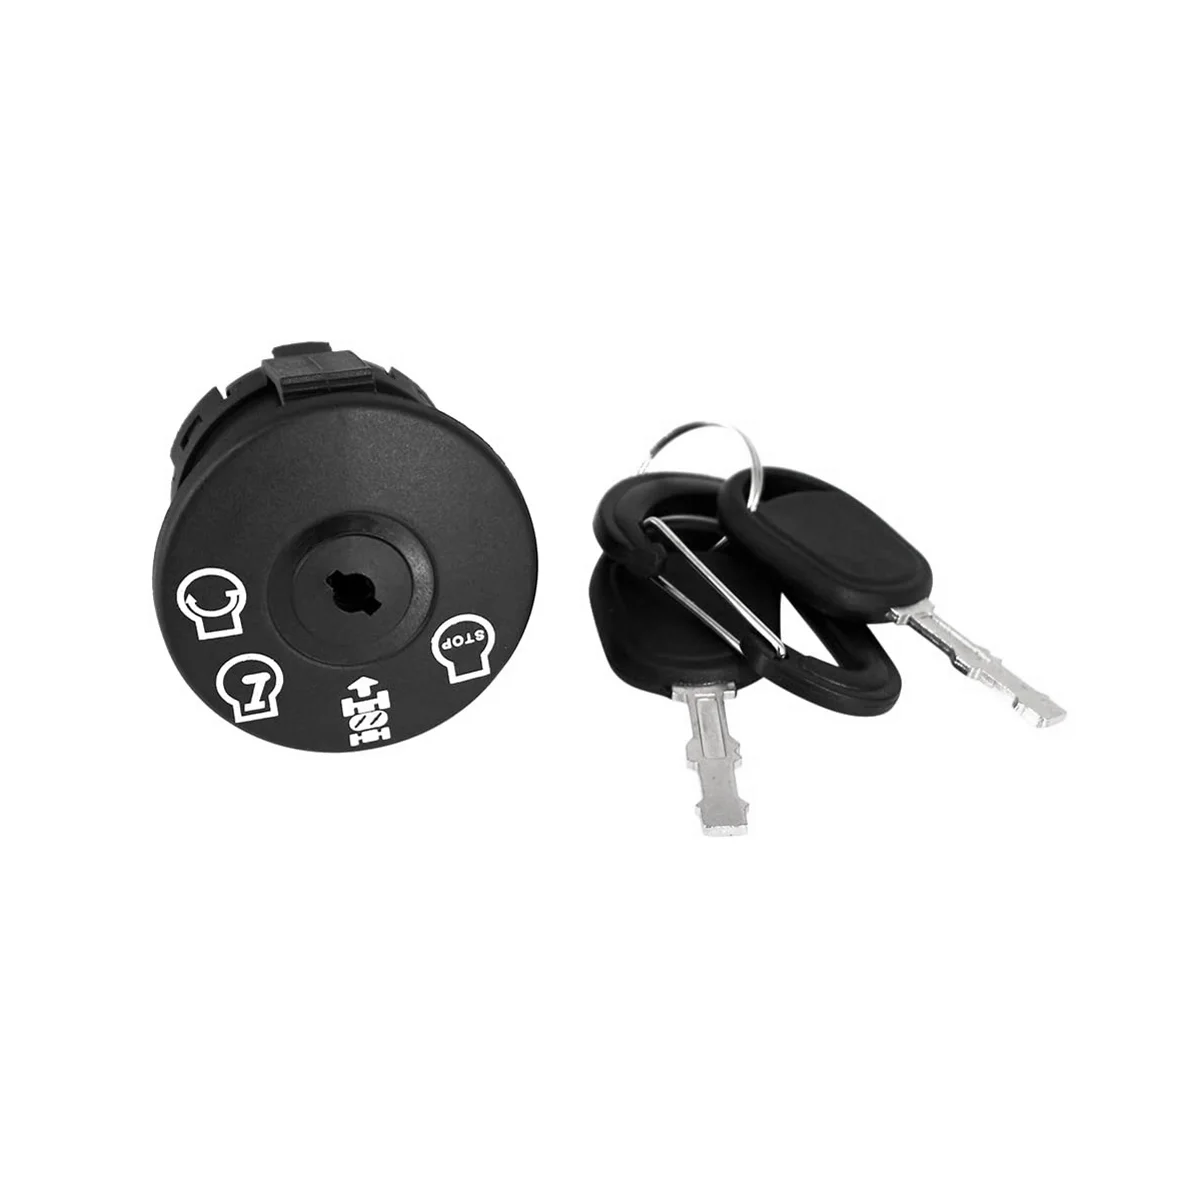 

Switch Starter Ignition Key Switch Replaces for AYP, for Husqvarna, Craftsman, Sears, Poulan Lawn Mower Rider 193350